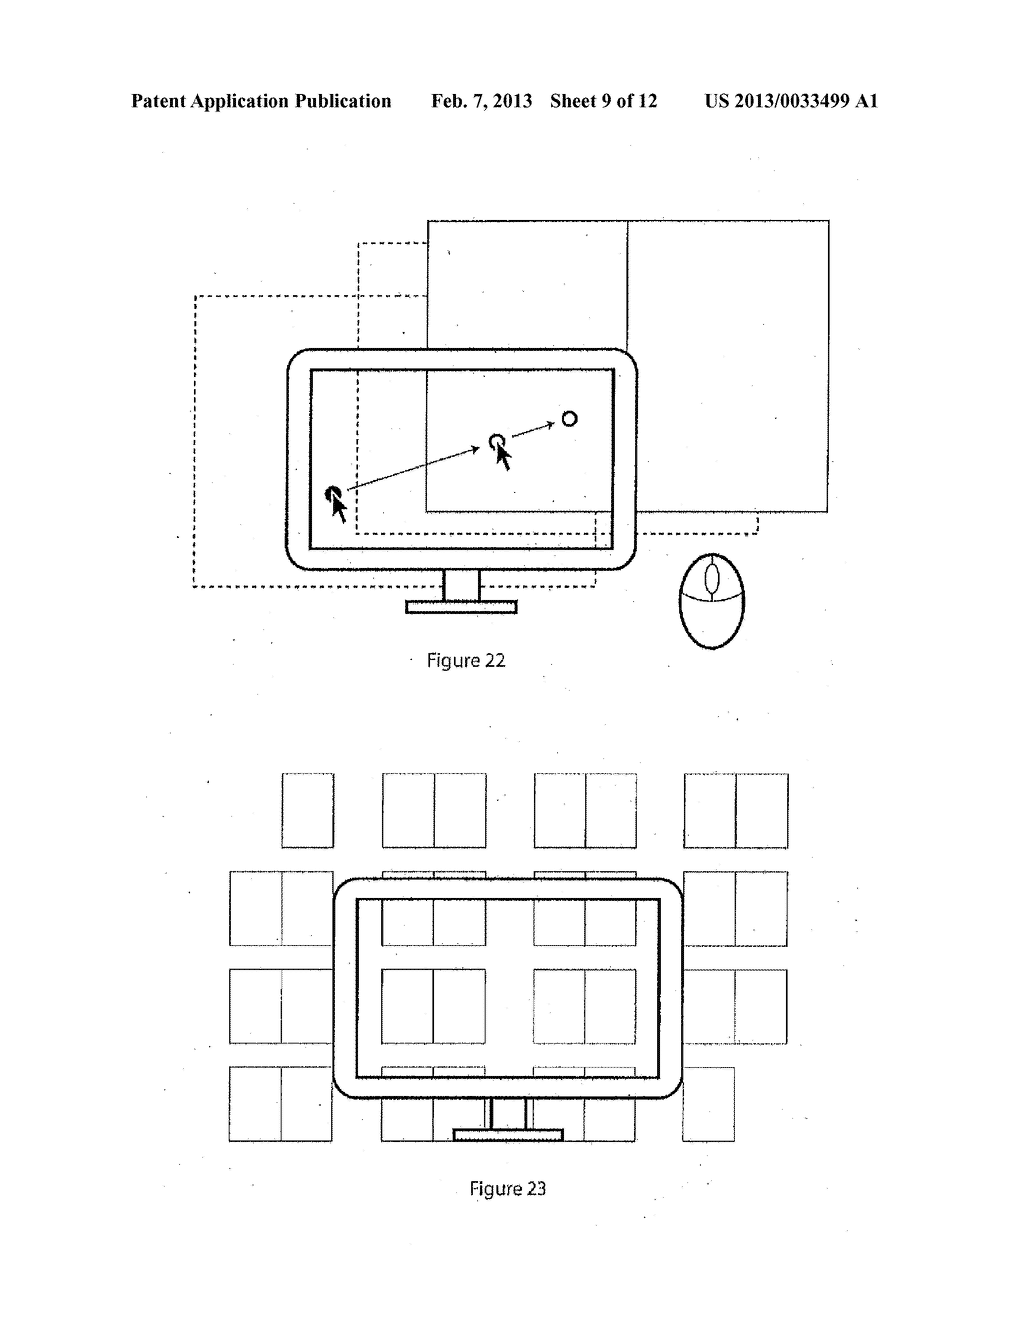 STATIONARY OR MOBILE TERMINAL CONTROLLED BY A POINTING OR INPUT PERIPHERAL - diagram, schematic, and image 10